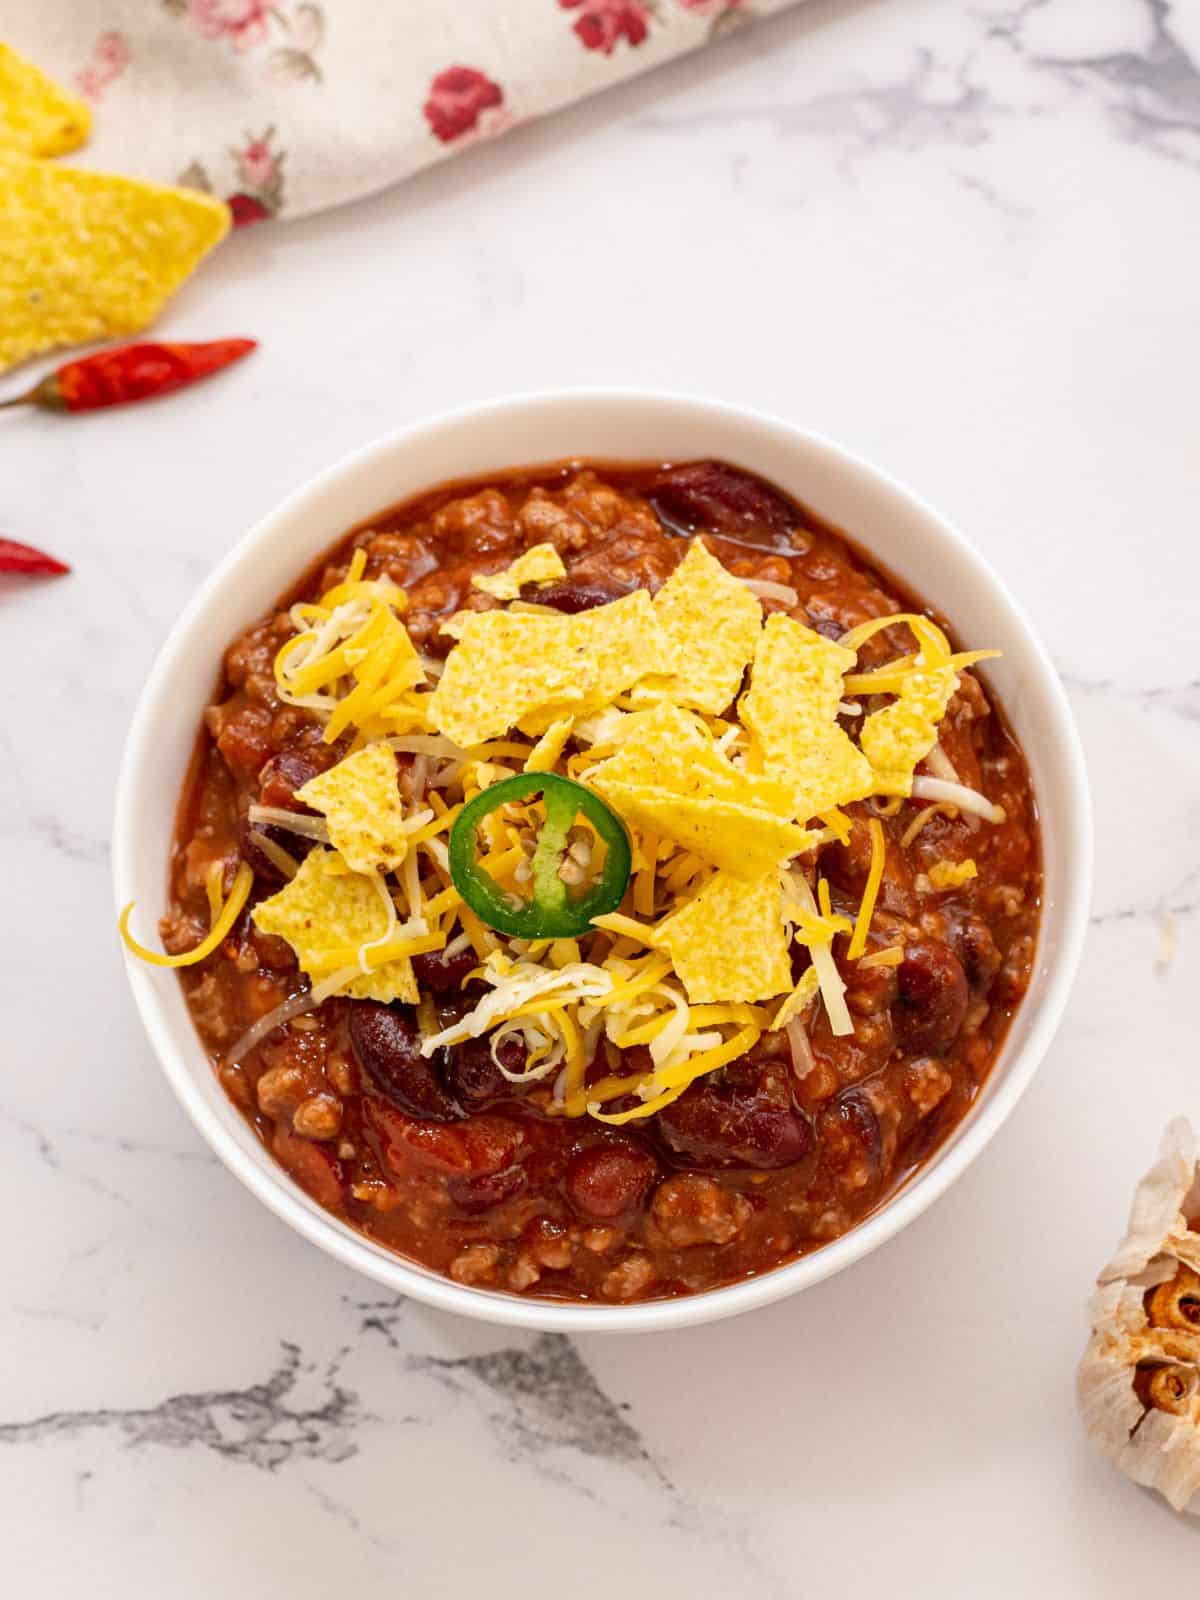 Bowl of crockpot chili topped with corn chips, shredded cheese, and jalapeno.